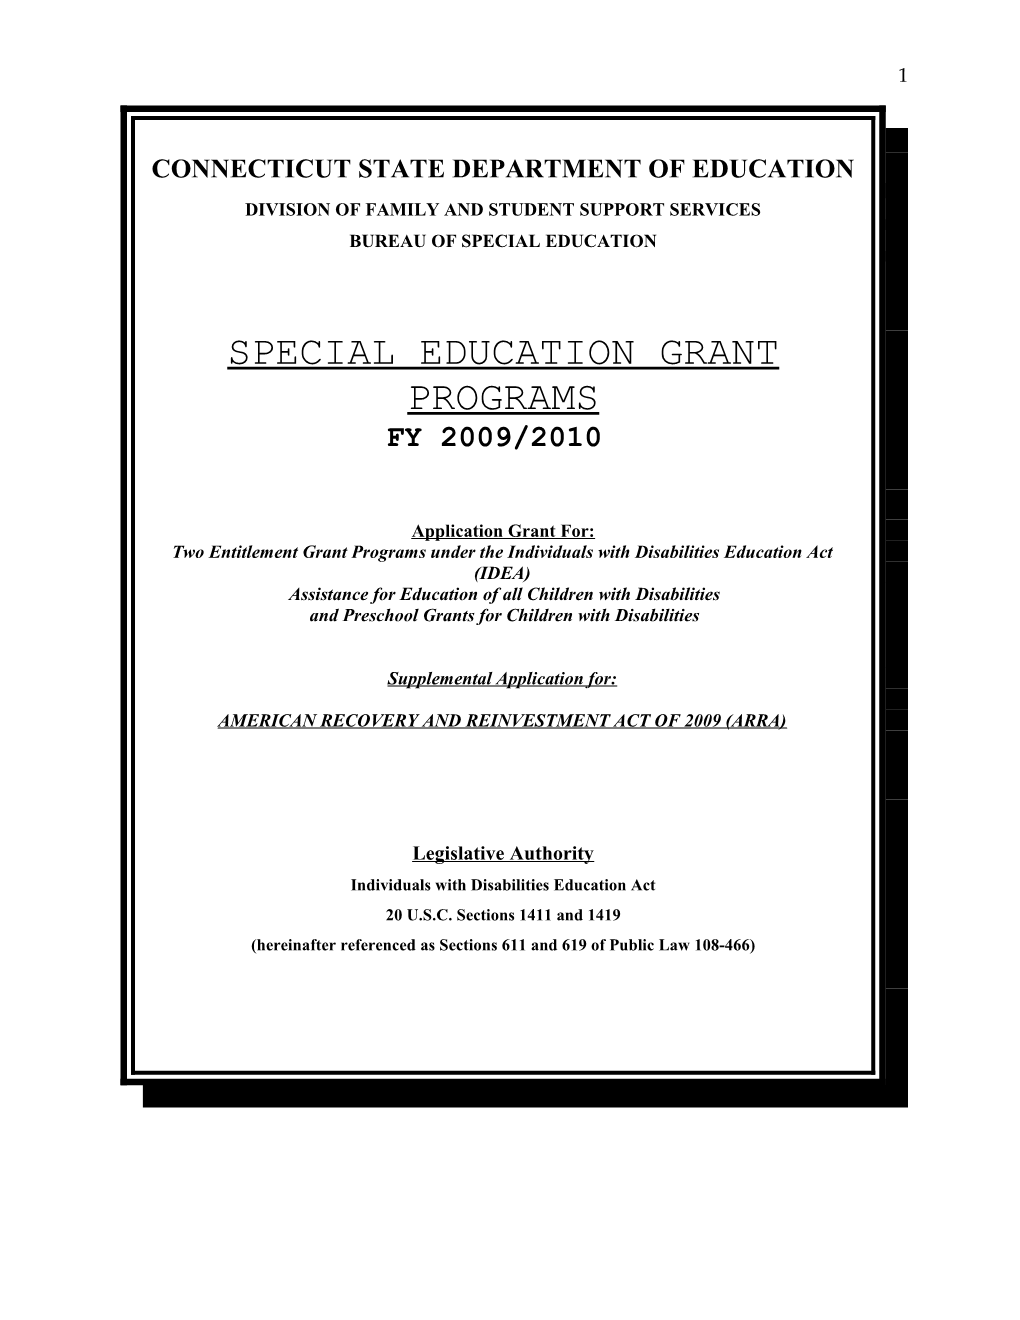 Connecticut State Department of Education s3